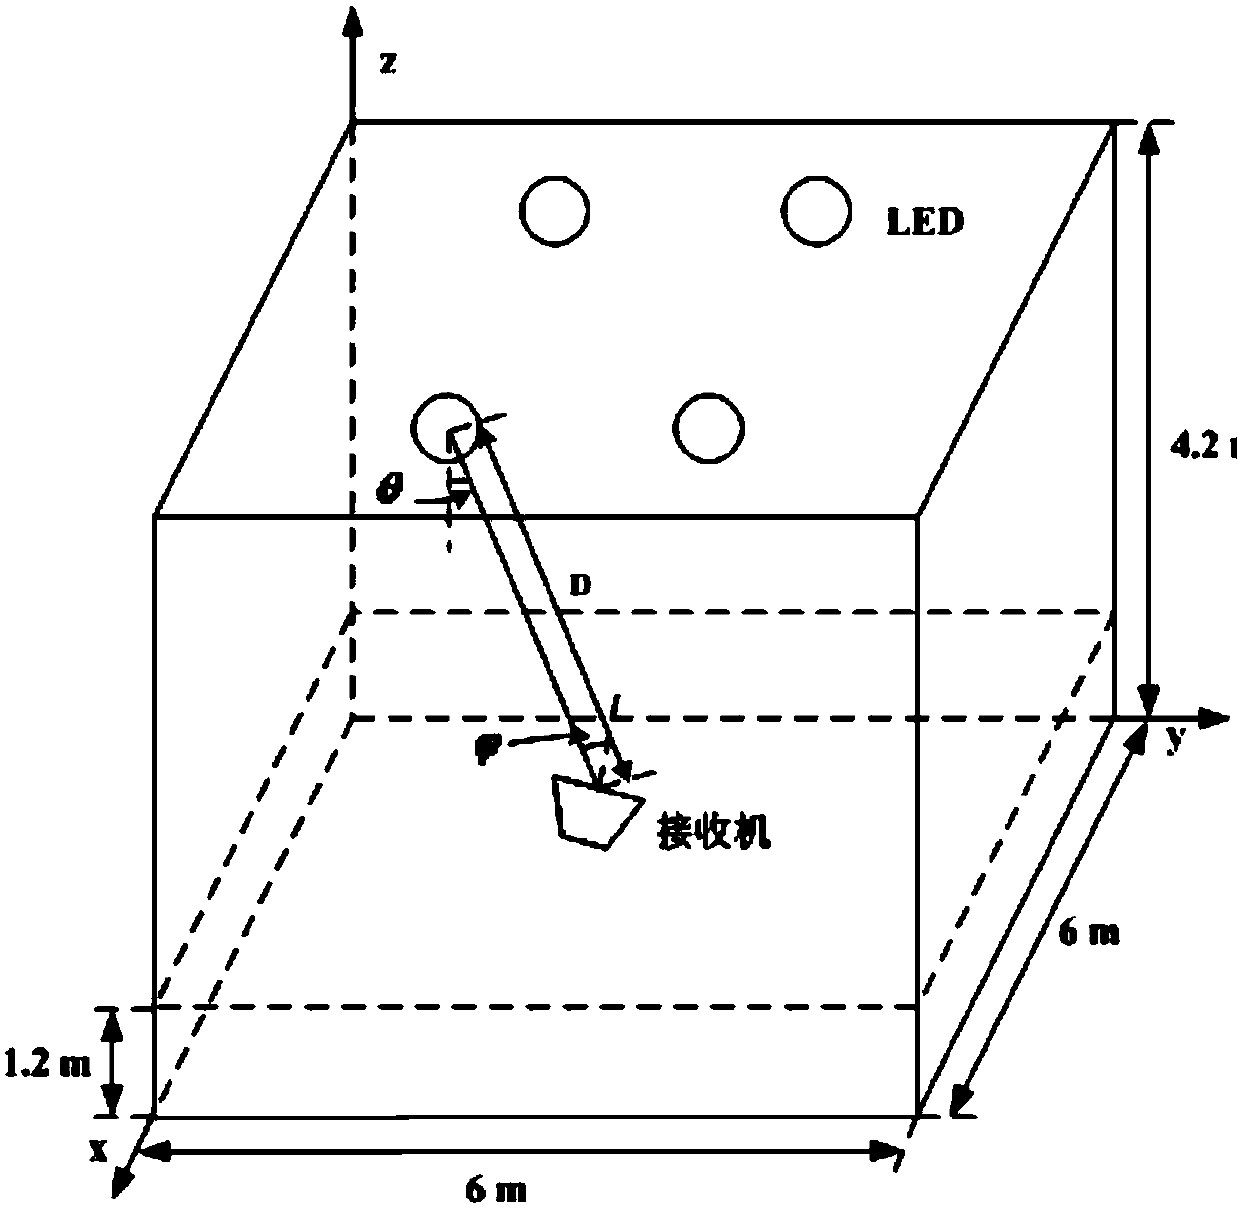 A LED indoor 2D positioning method combined with accelerometer